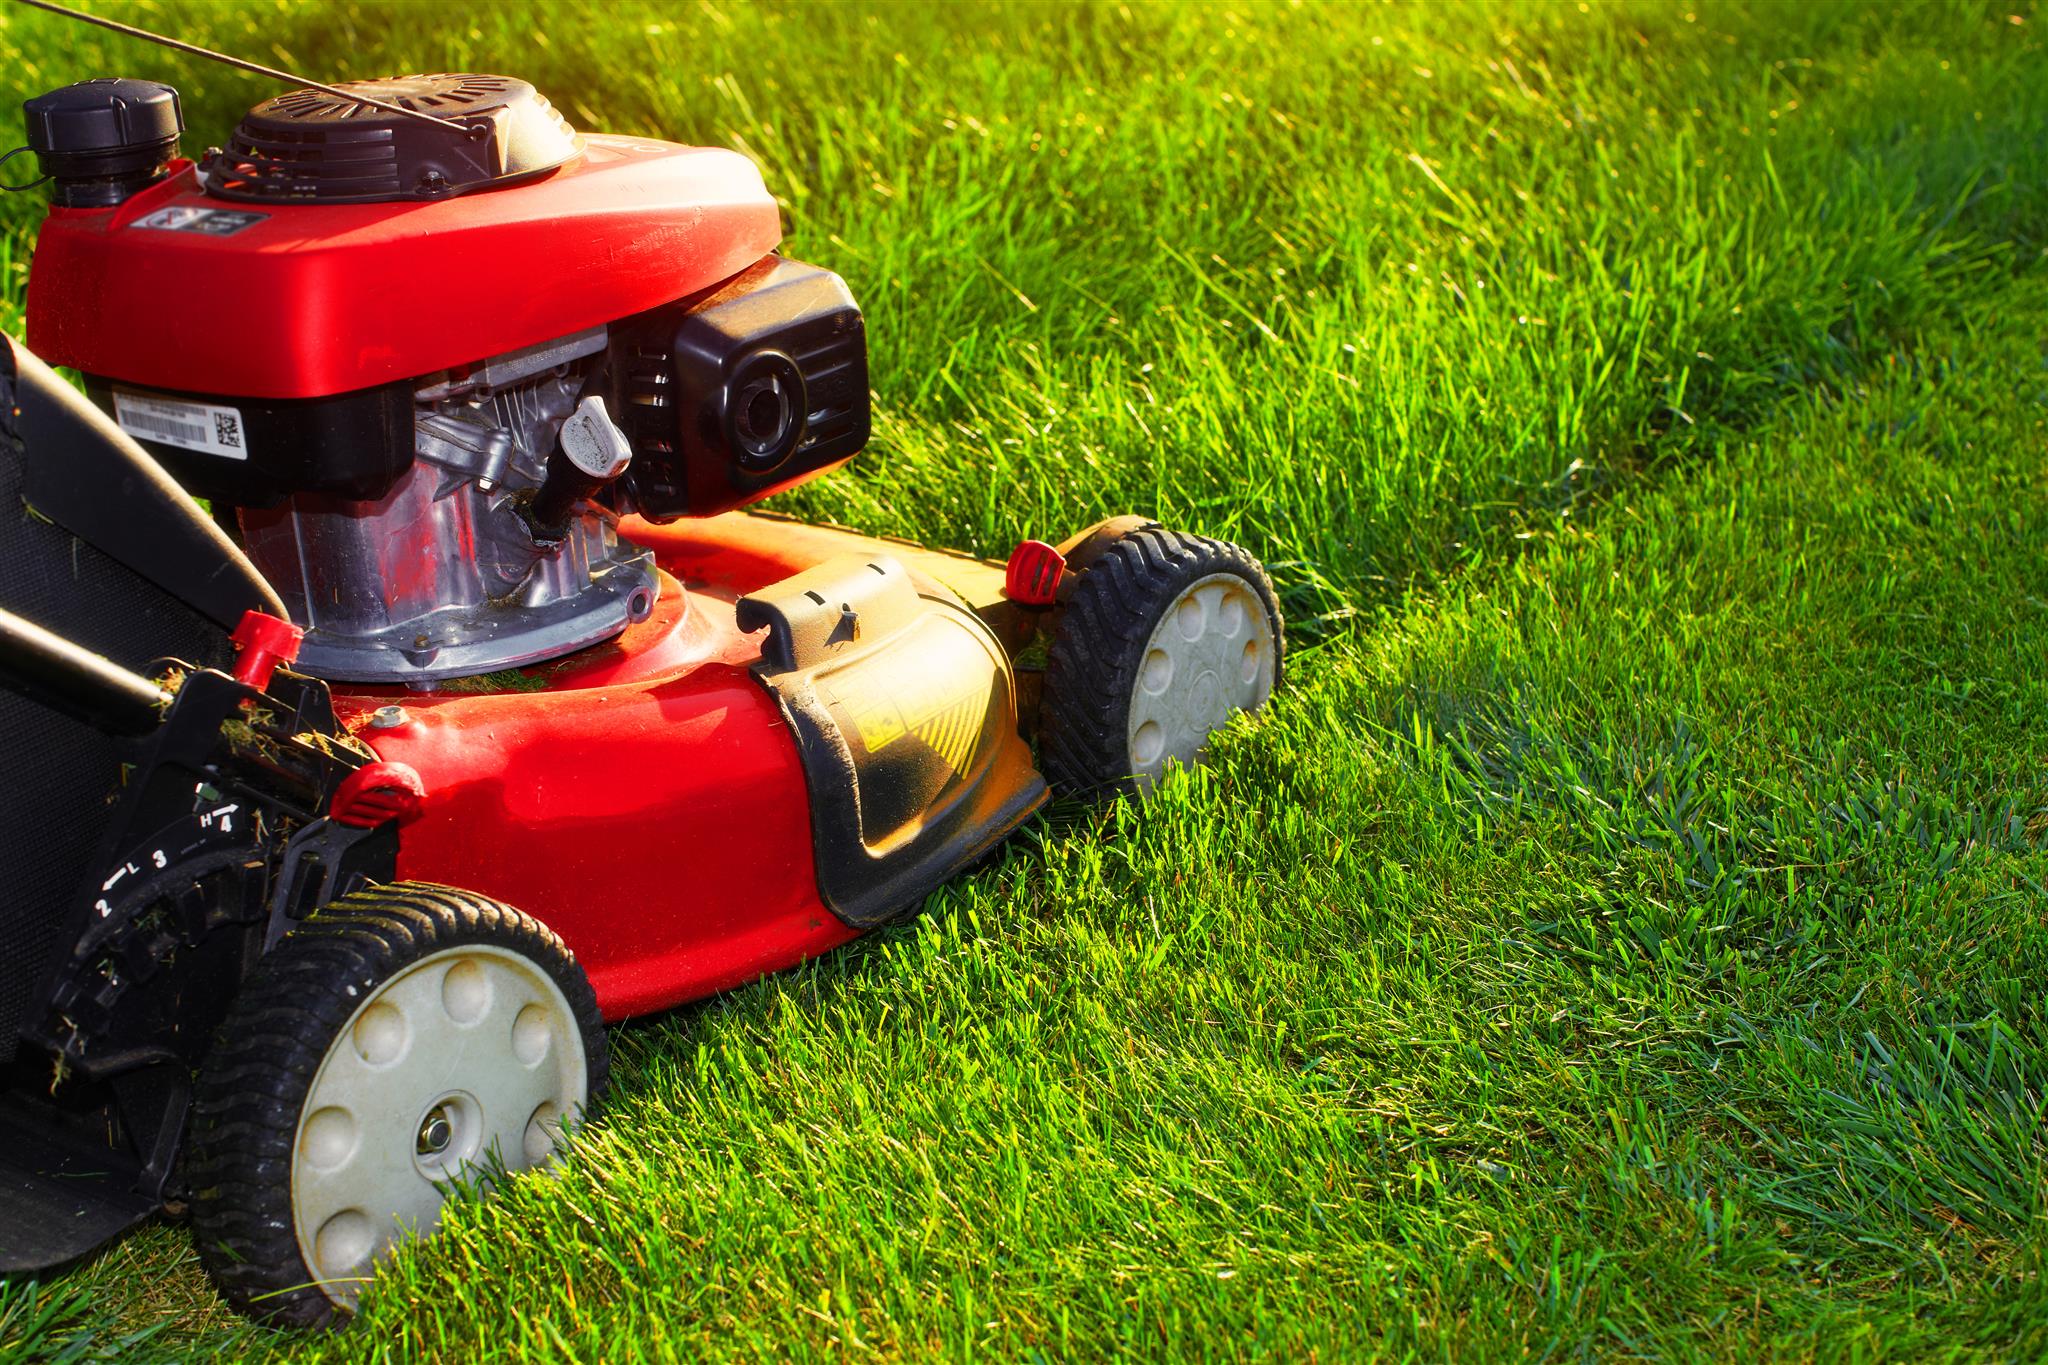 Reducing the High Risks of Operating Lawn and Garden Machinery